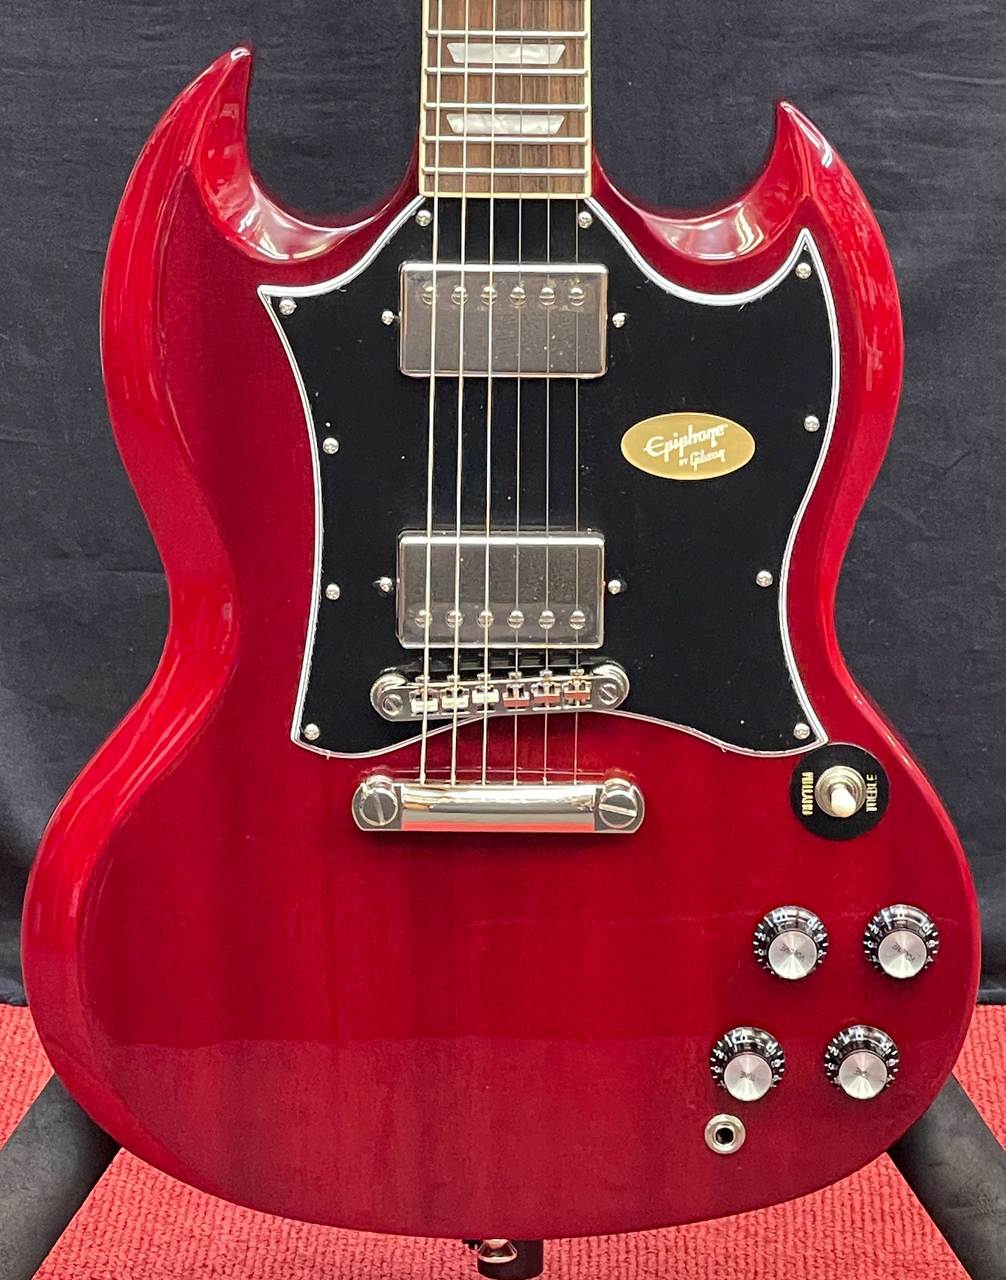 Epiphone SG Standard -Heritage Cherry-【23041524910】【3.09kg】 新品[エピフォン][SG][スタンダード][レッド 赤][Electric Guitar エレキギター]のサムネイル